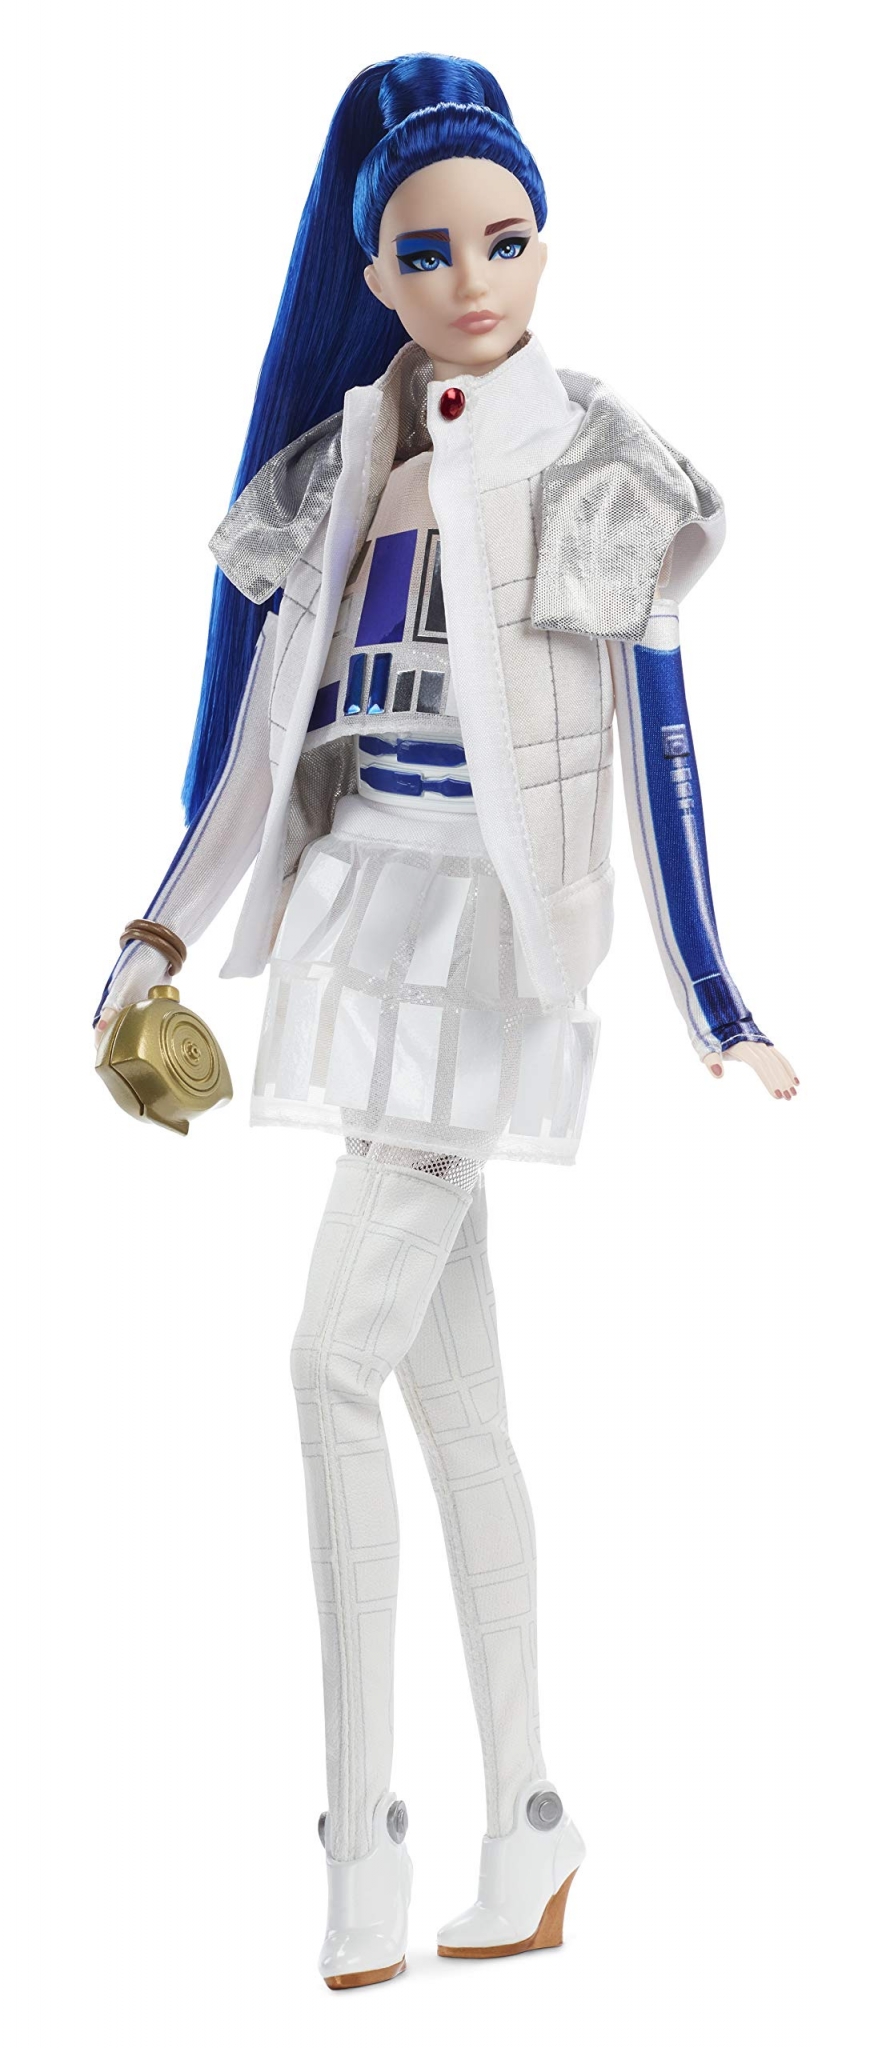 Barbie collector Star Wars R2-D2 doll 2019 photo